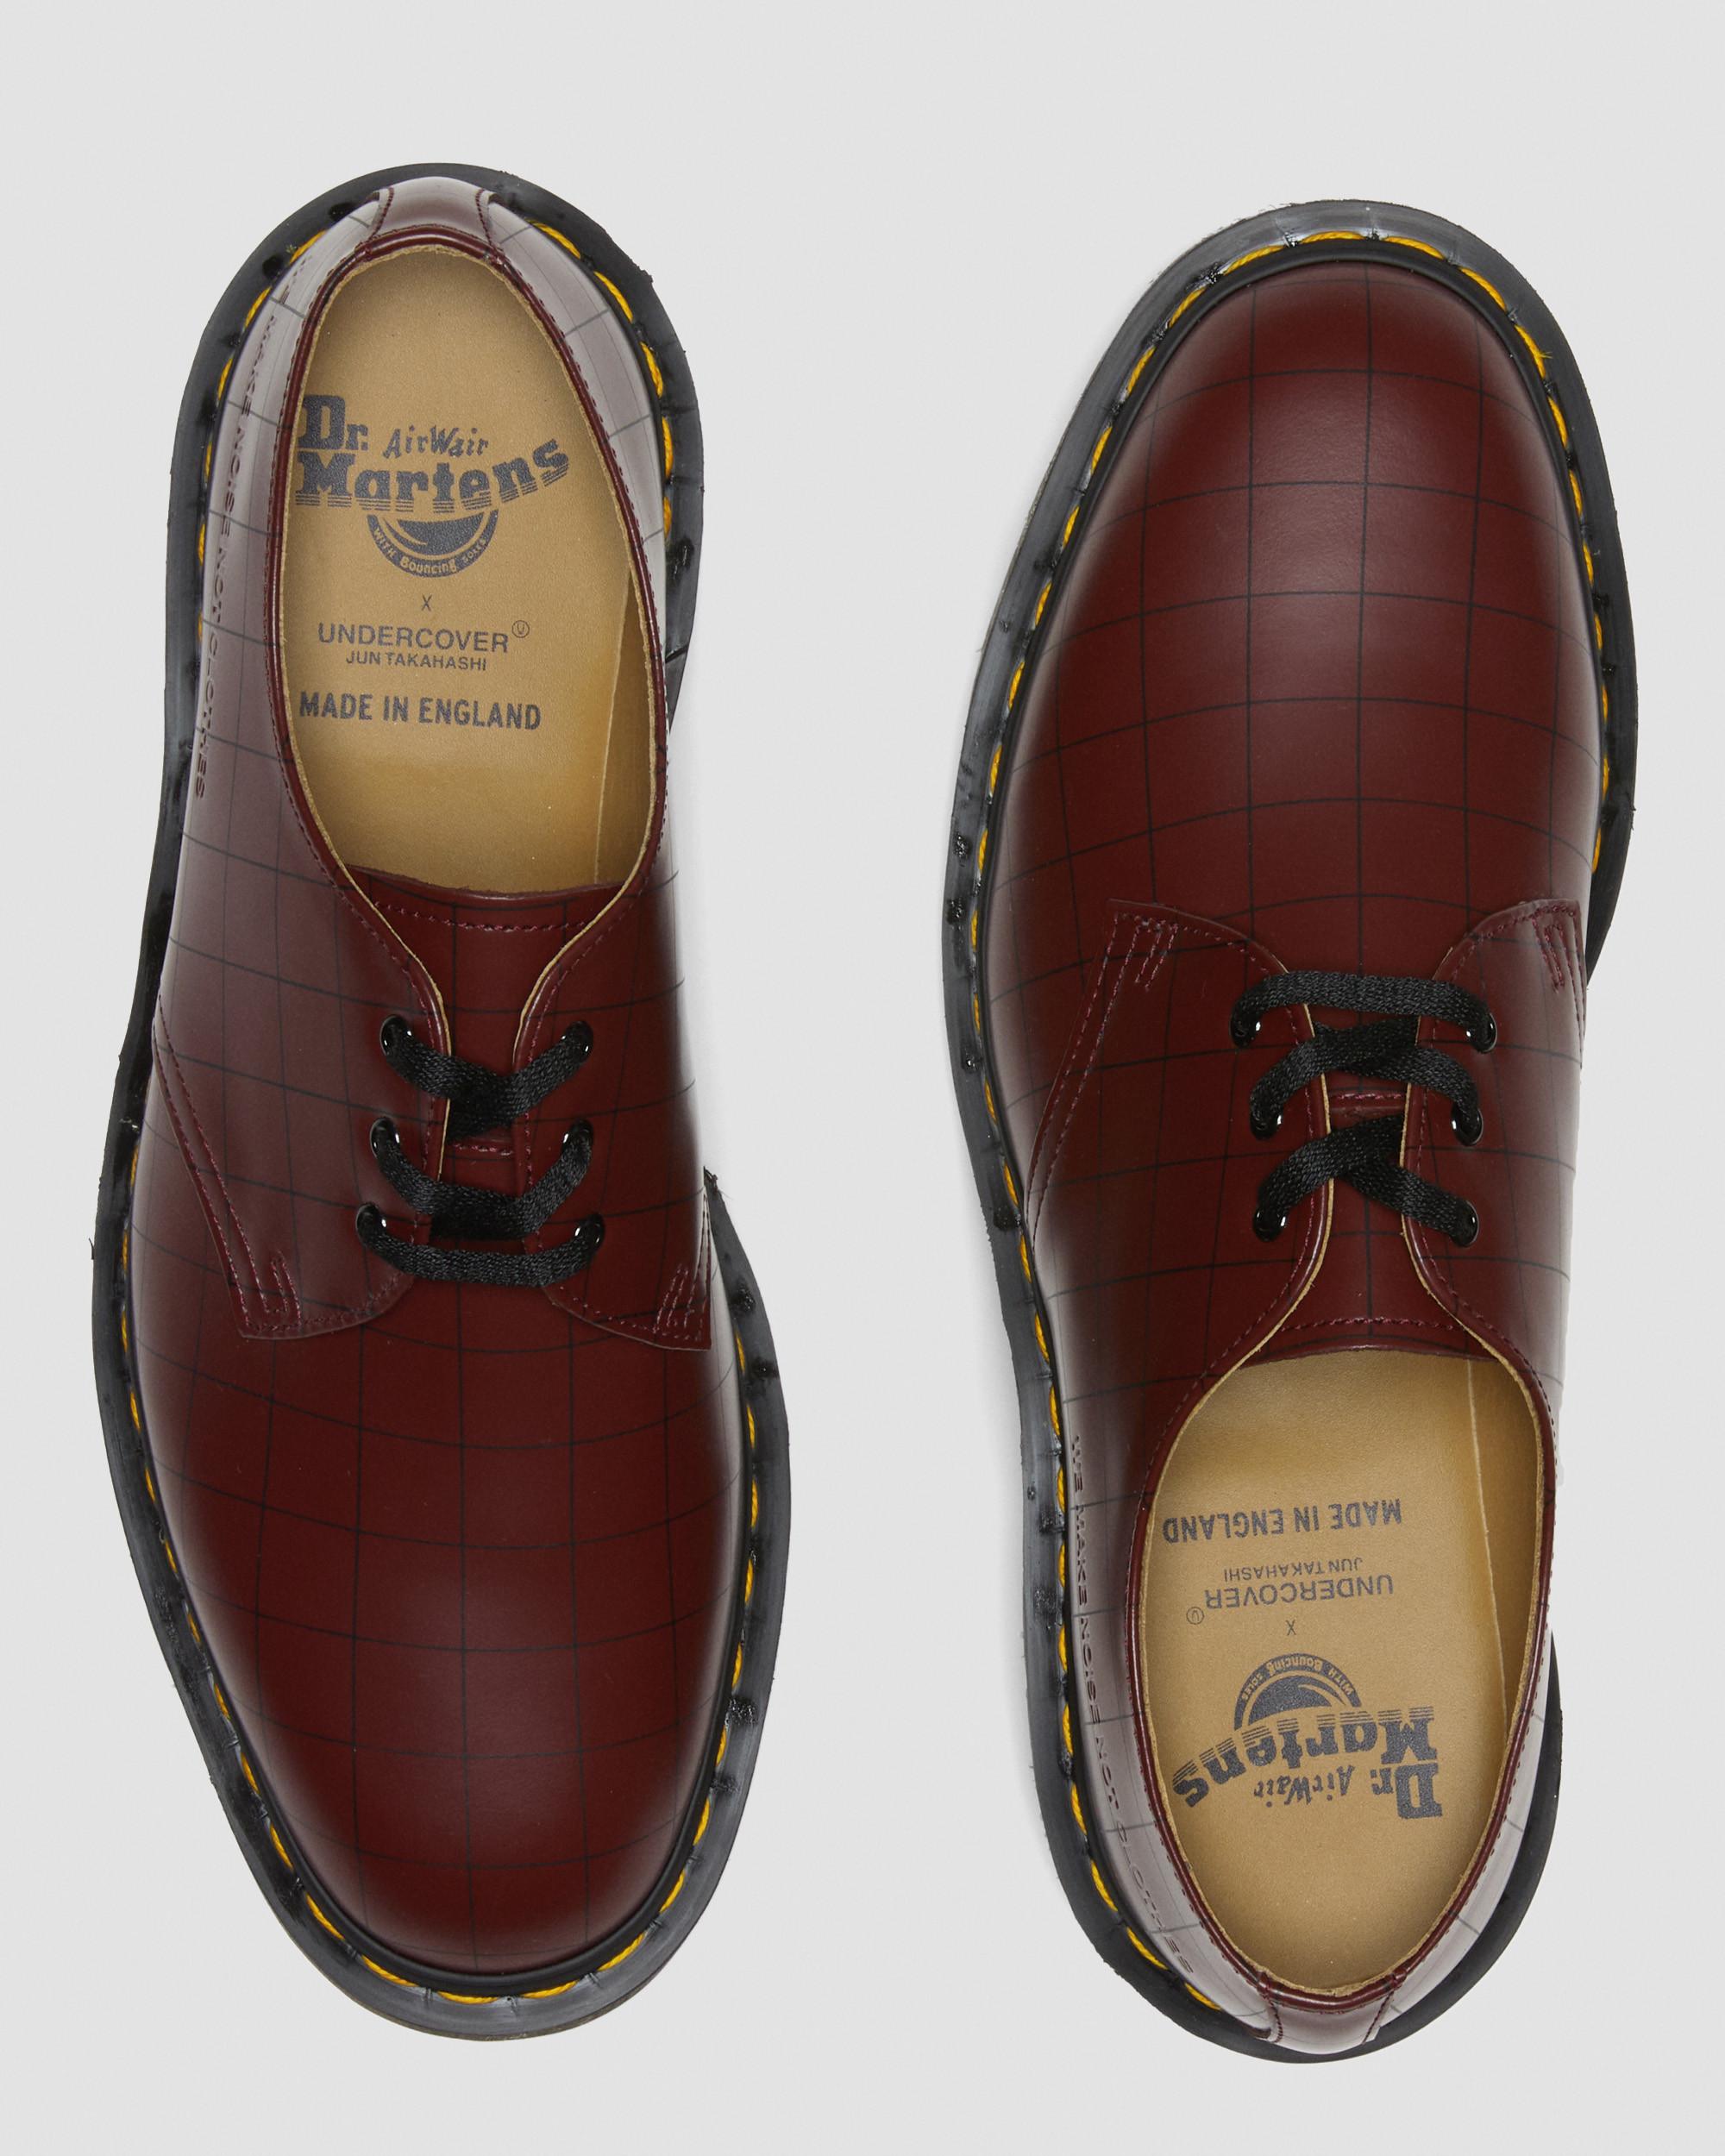 DR MARTENS 1461 Undercover Made in England Leather Oxford Shoes